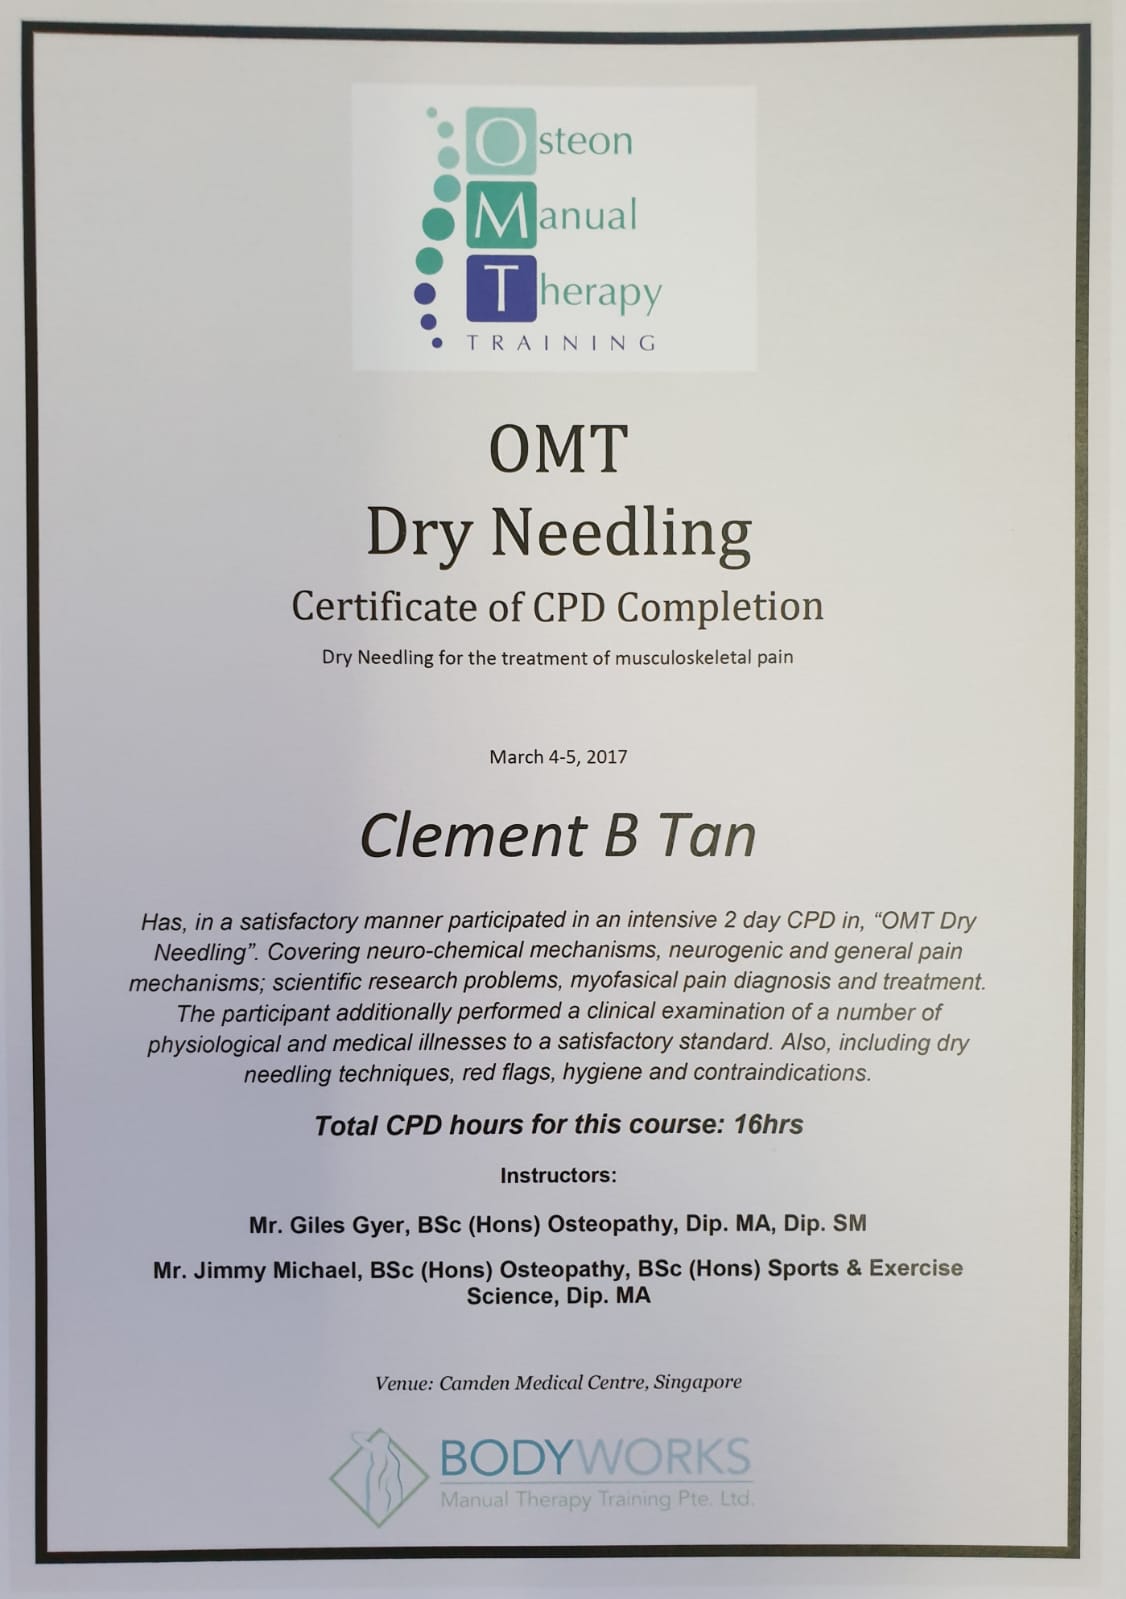 Osteon Manual Therapy Dry Needling certificate